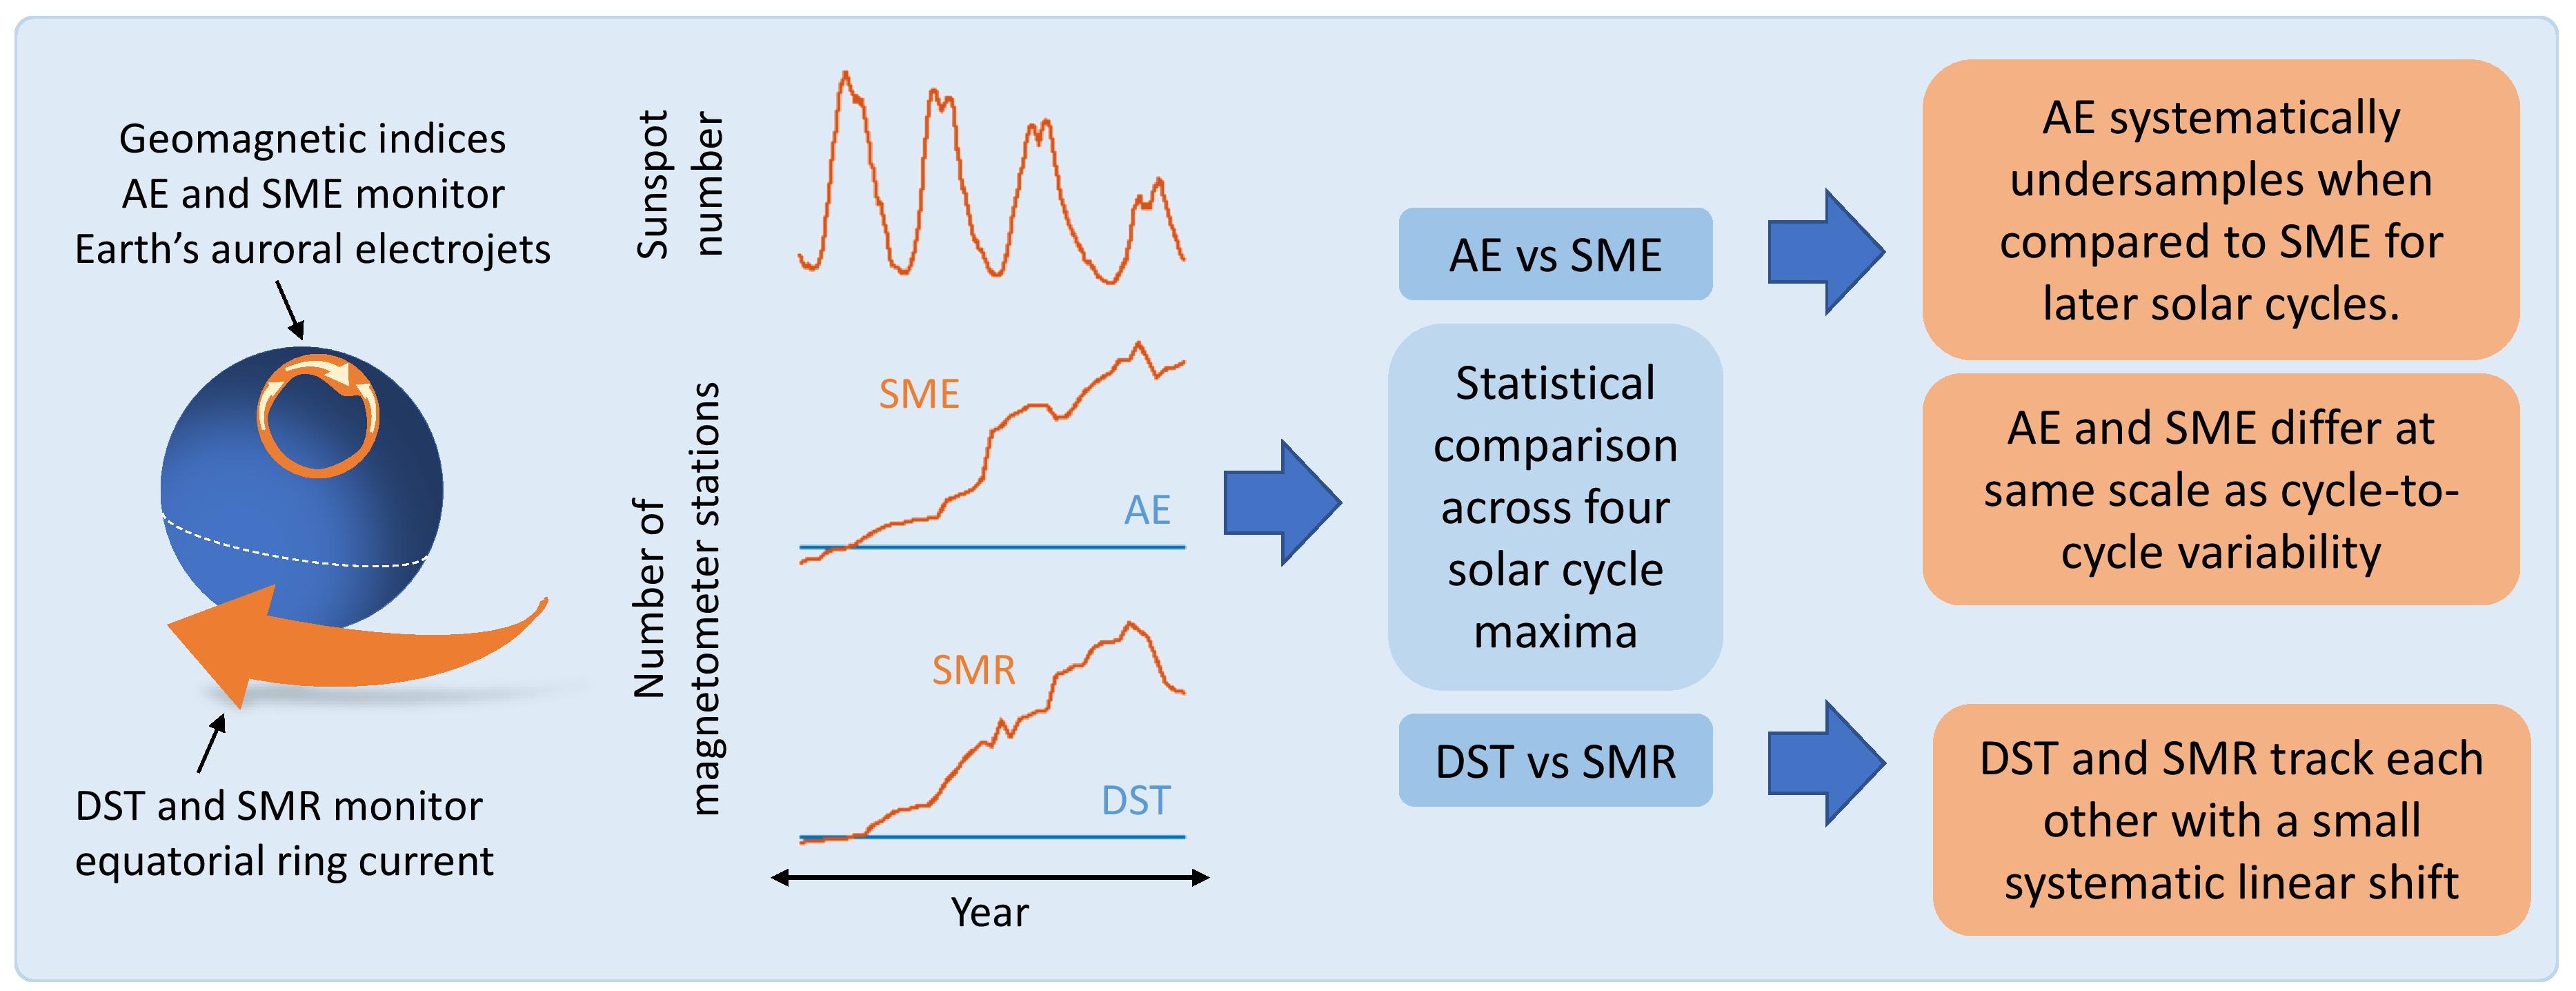 Graphical abstract, left to right shows current systems on earth, increase in magnetometer stations over four solar cycles, text 'statistical comparison of indices over four solar cycles', text 'AE vs SME', text 'Dst vs SMR', text 'AE systematically undersamples when compared to SME for later solar cycles.', text'AE and SME differ at same scale as cycle-to- cycle variability', text 'DST and SMR track each other with a small systematic linear shift'.